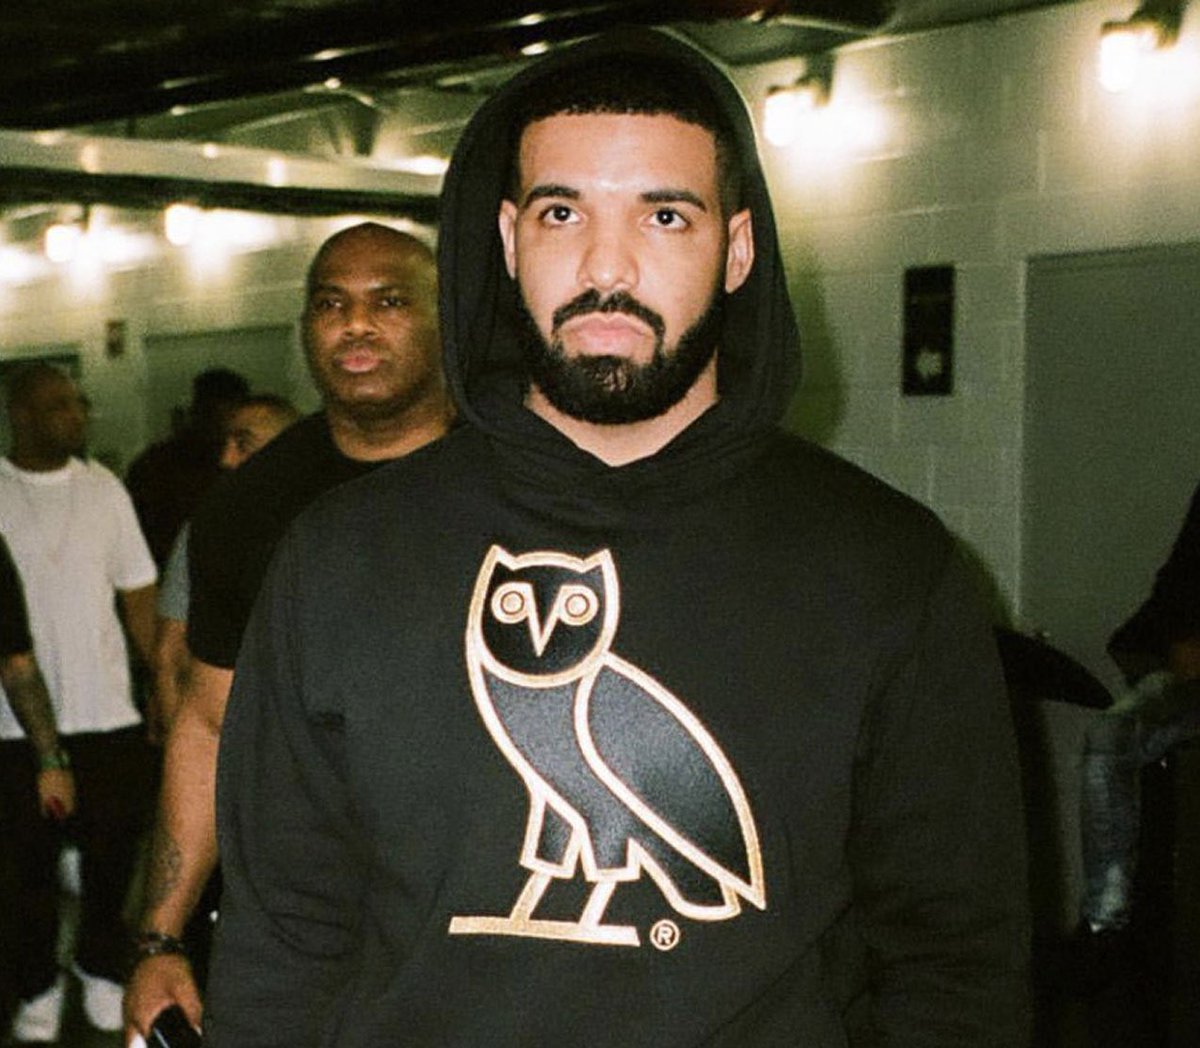 RT @Rap: Drake has now tied The Beatles for the most top 5 hits in Billboard Hot 100 History with 29‼️📈 https://t.co/aVDfdGl1sD